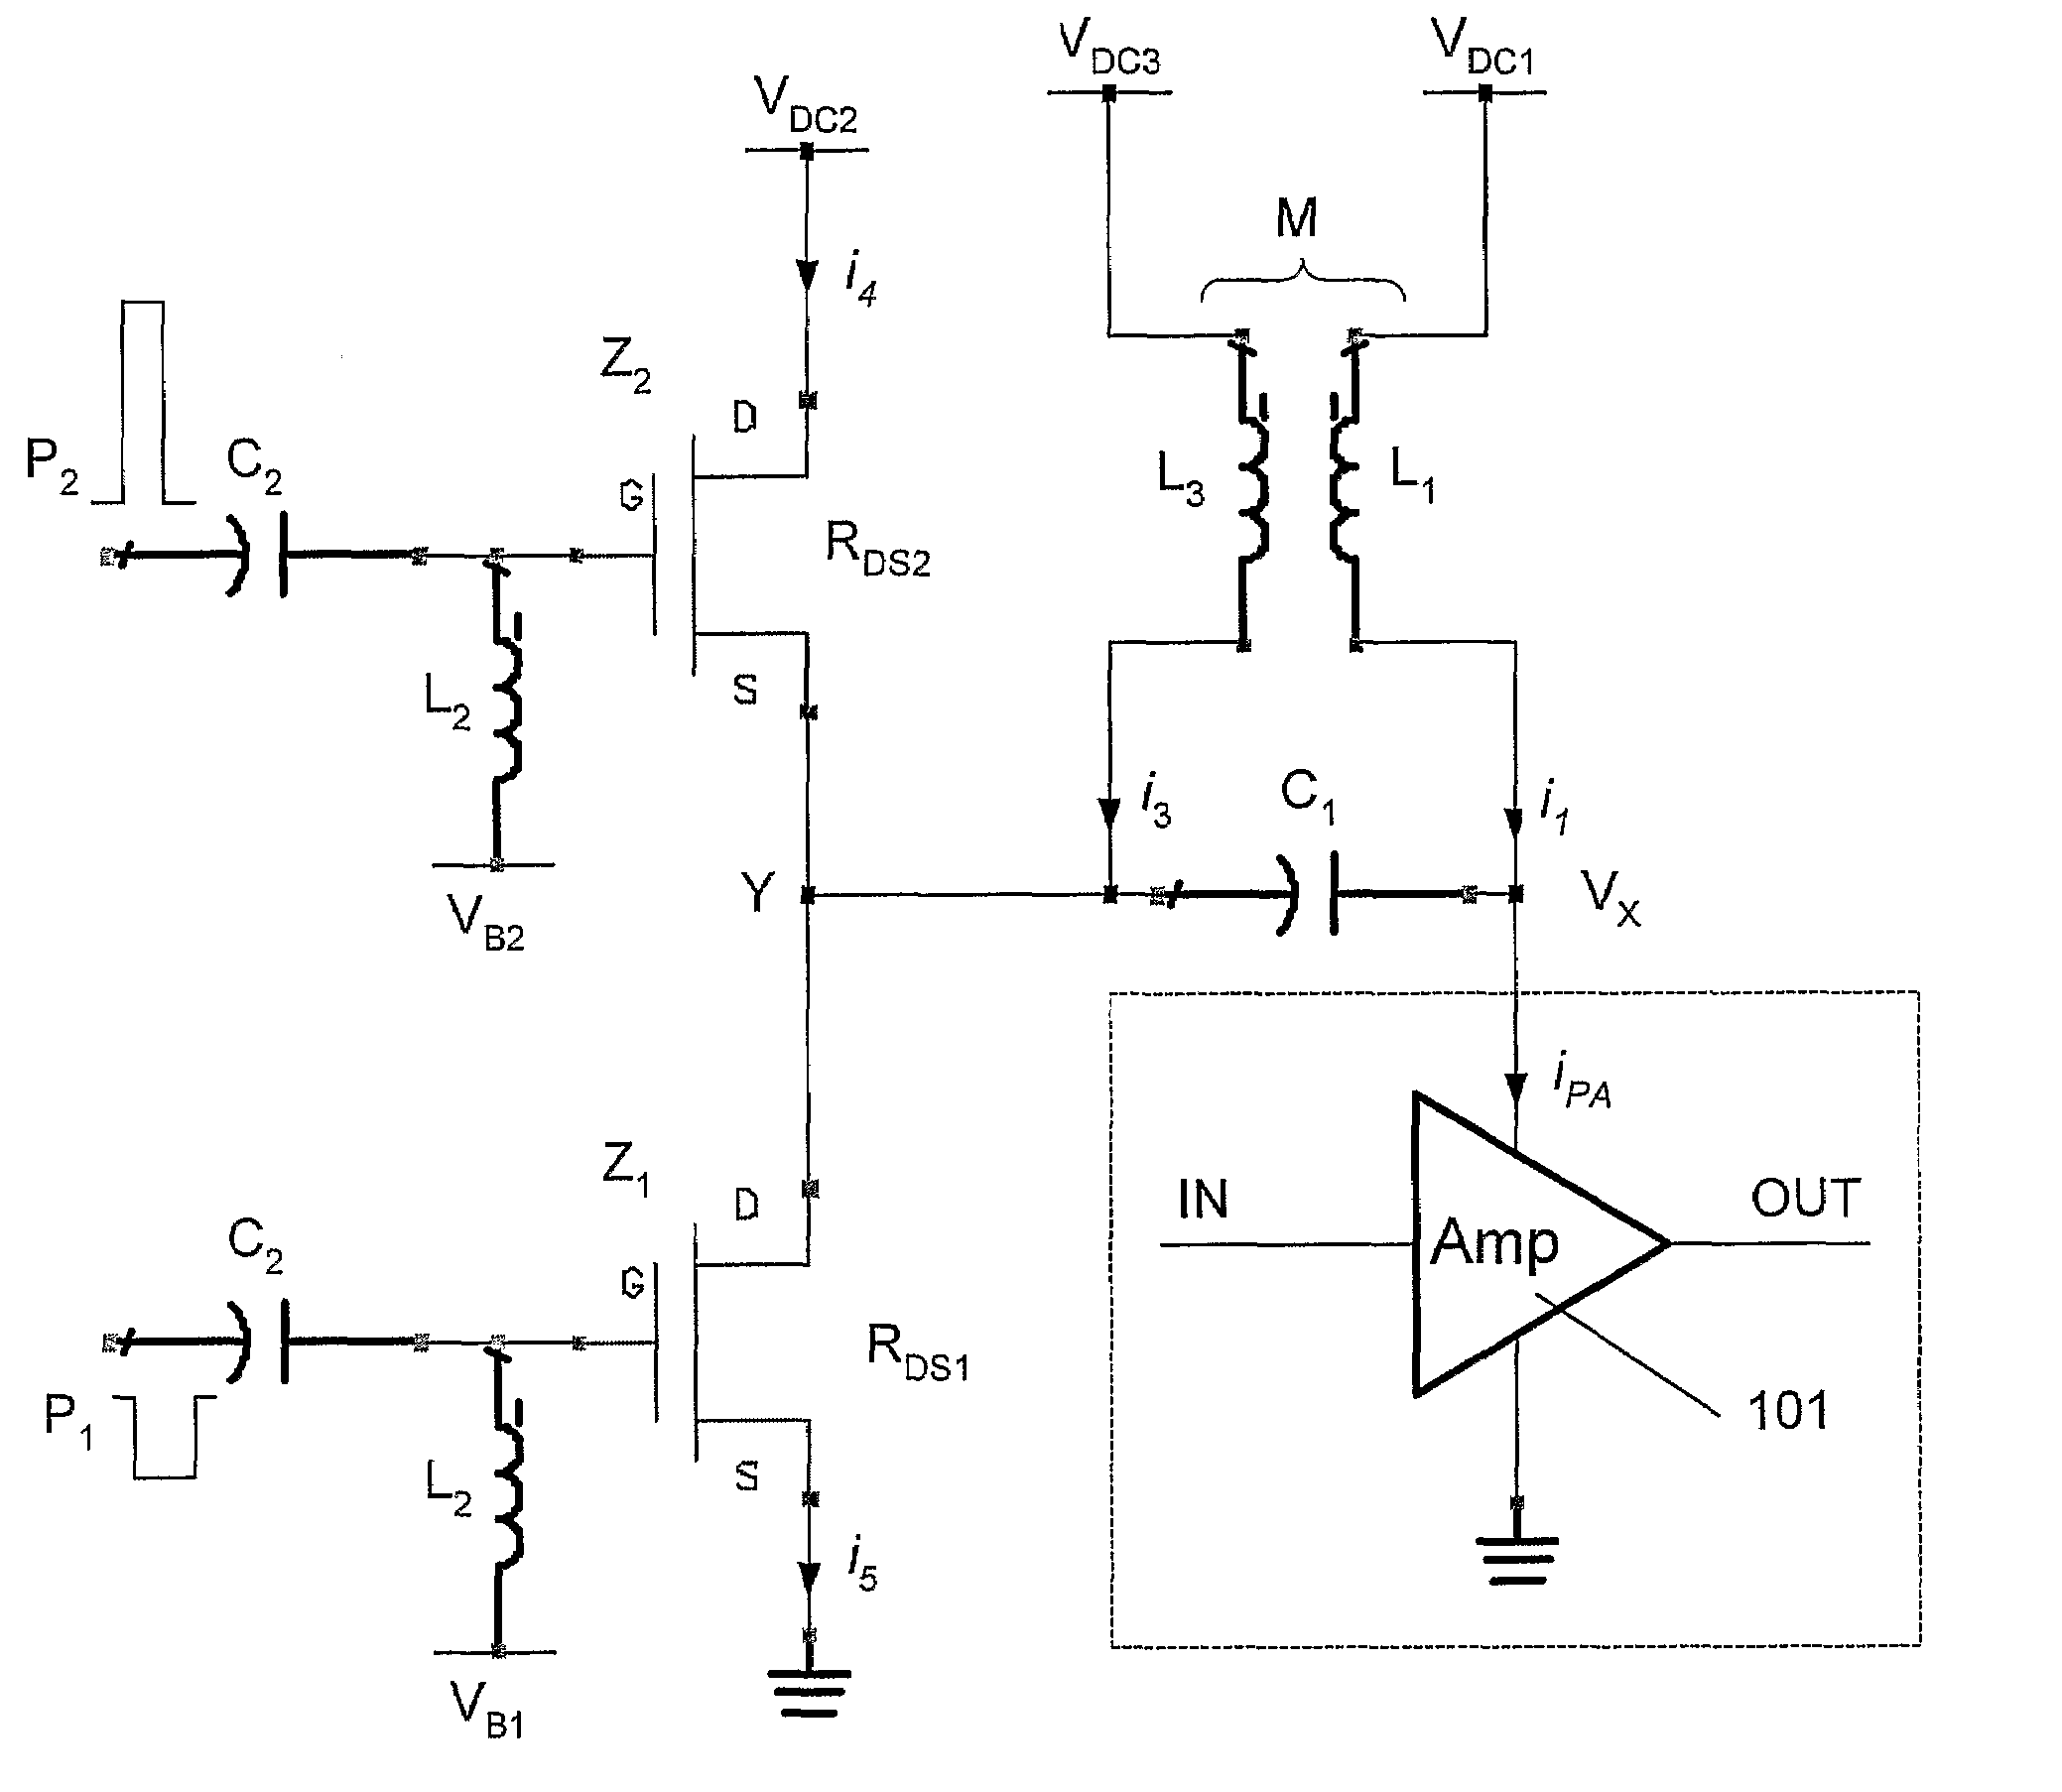 Transformer-capacitor enhancement circuitry for power amplifiers